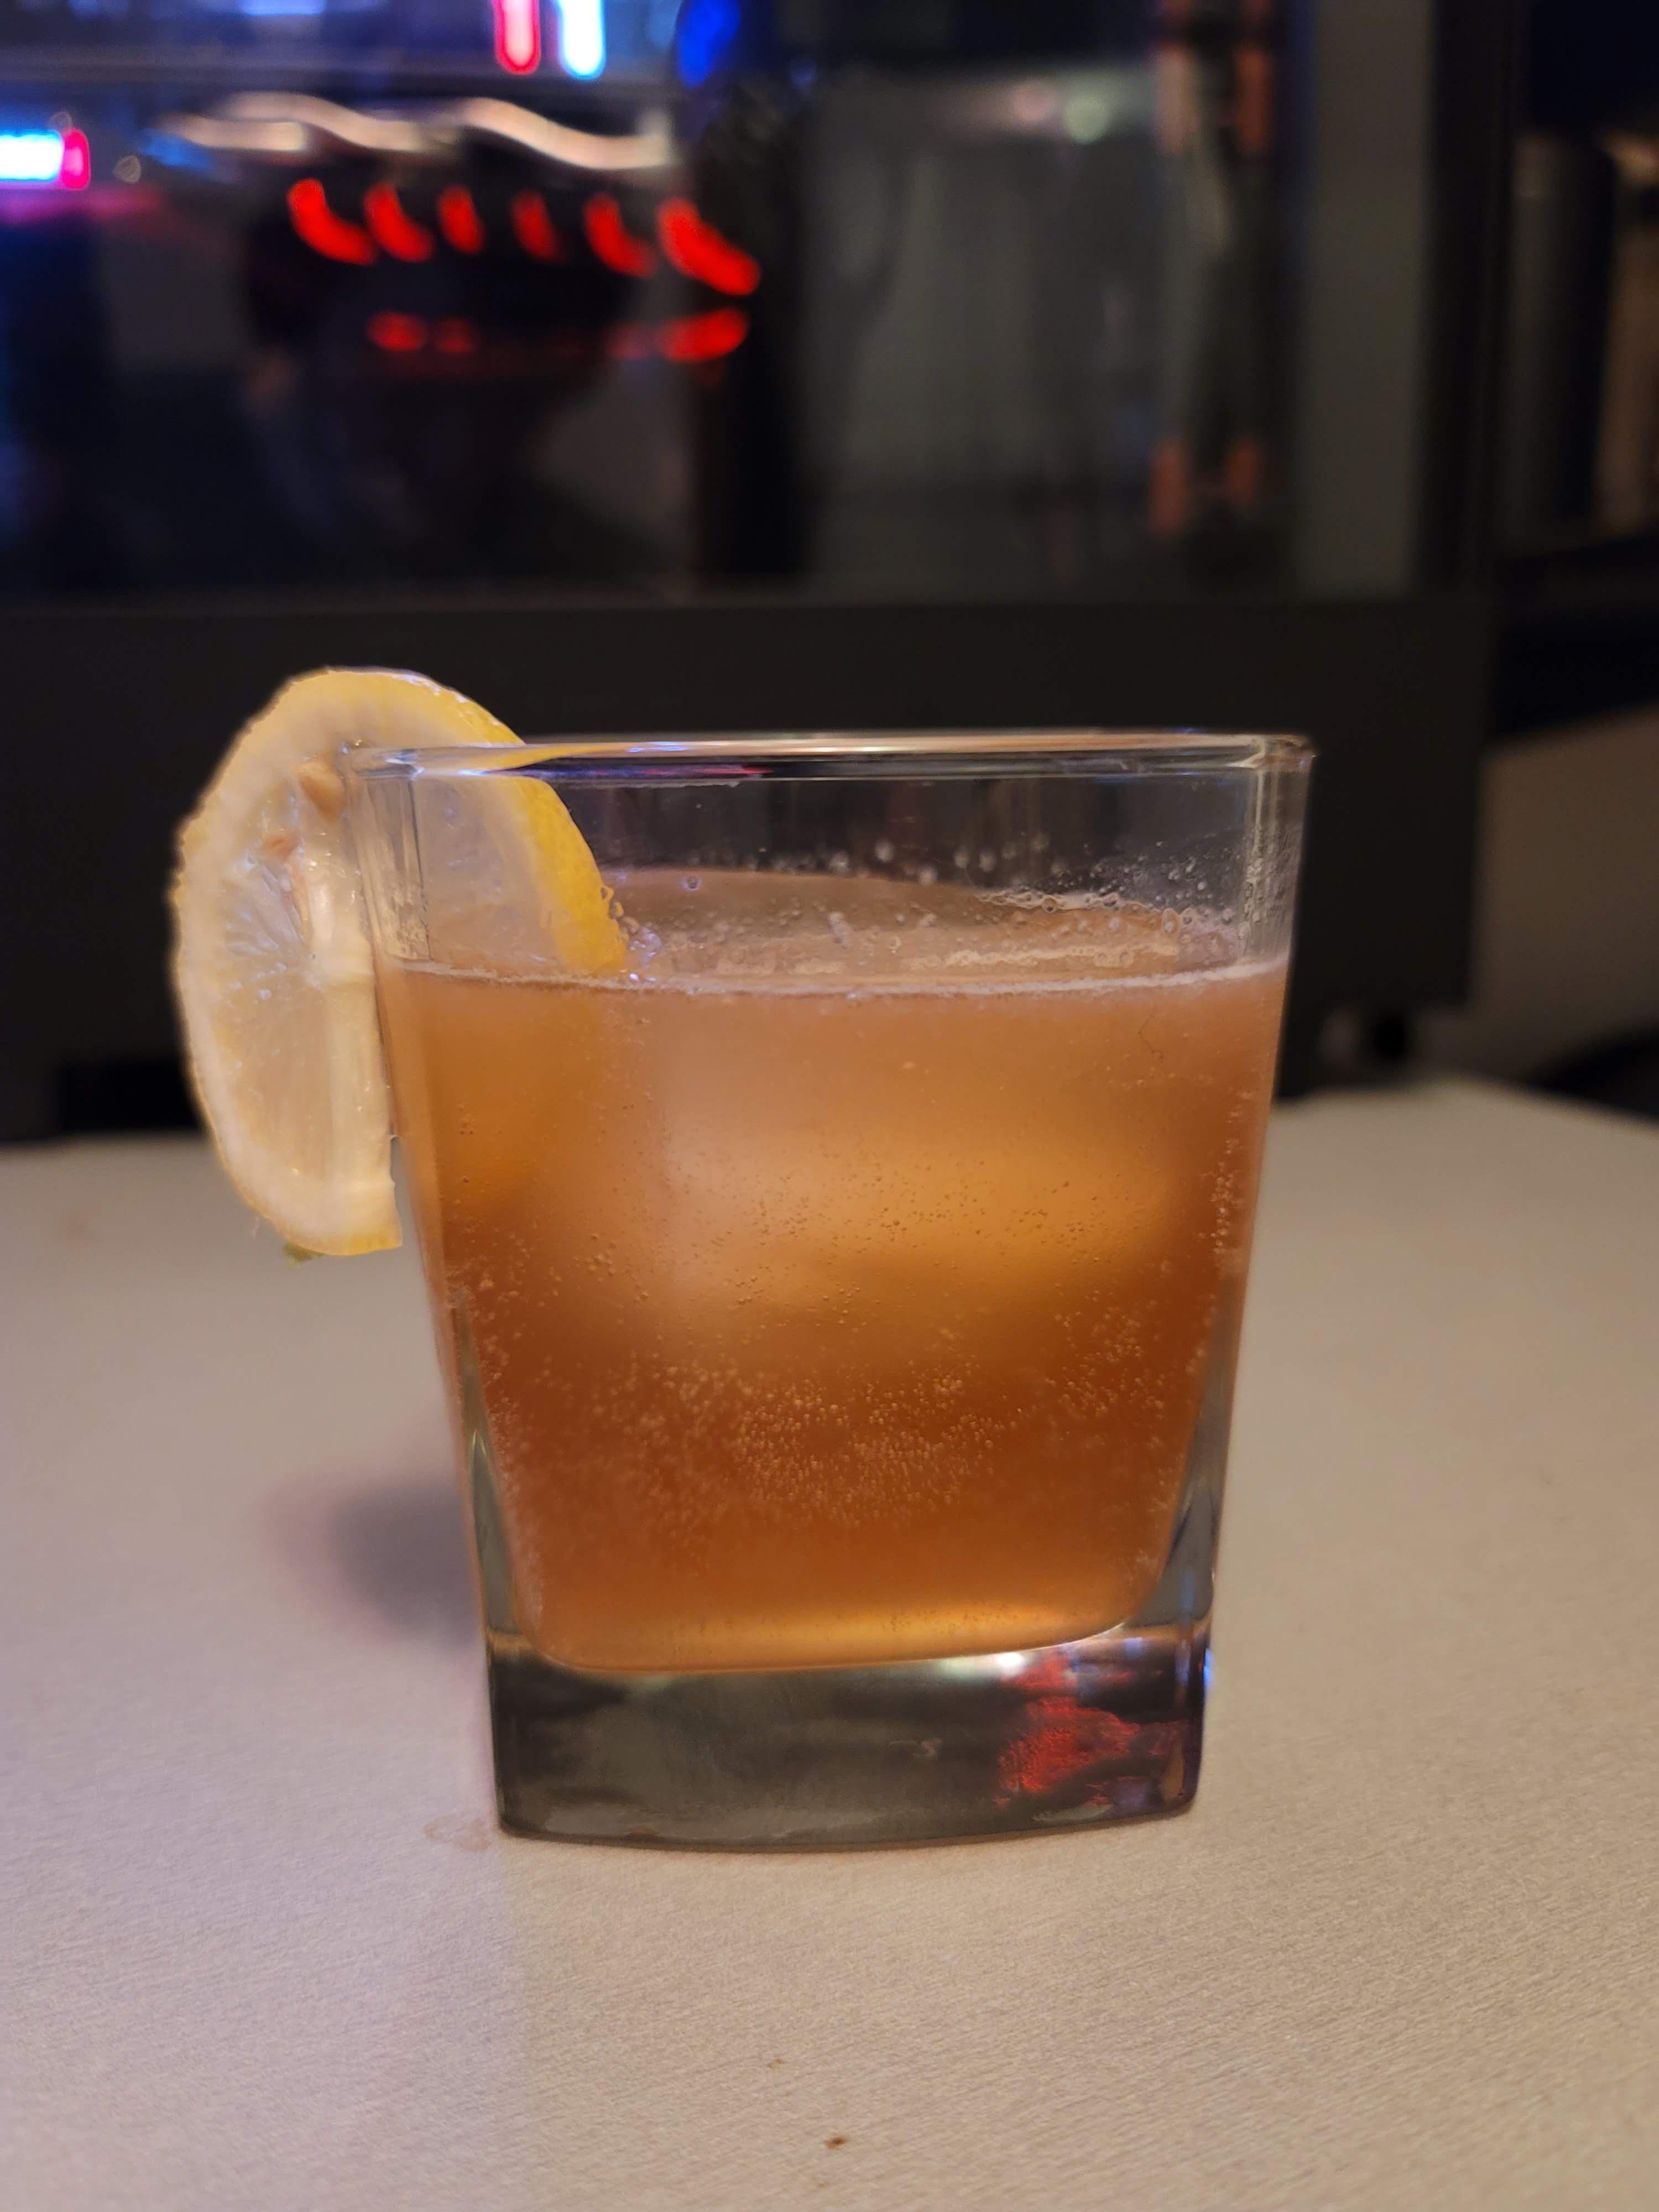 Planter's Punch